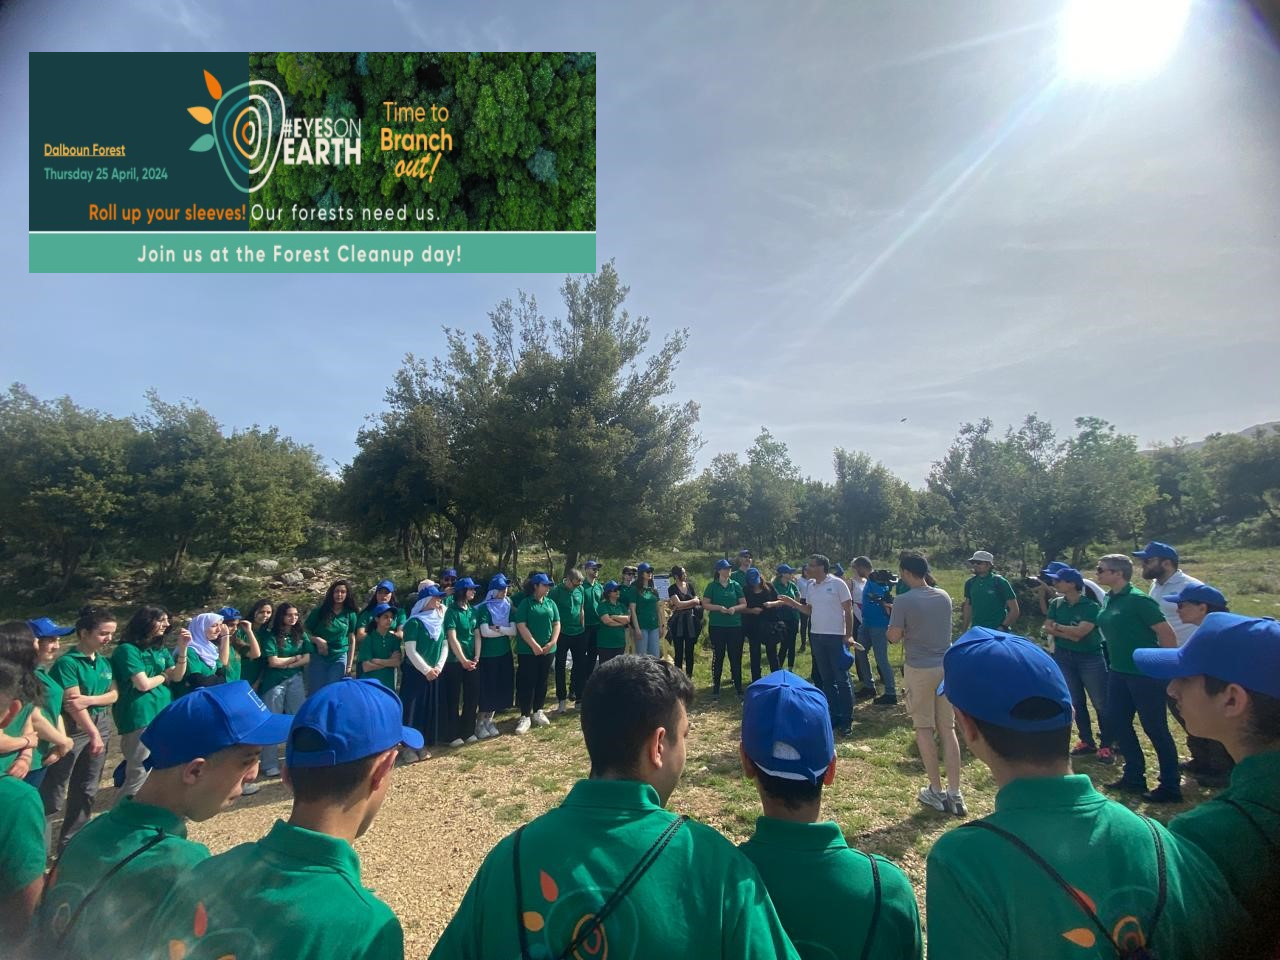 Bulgarian Embassy in Beirut participated in a one-day project aimed at awareness raising for minors related to their responsibility for saving the environment at a local level.